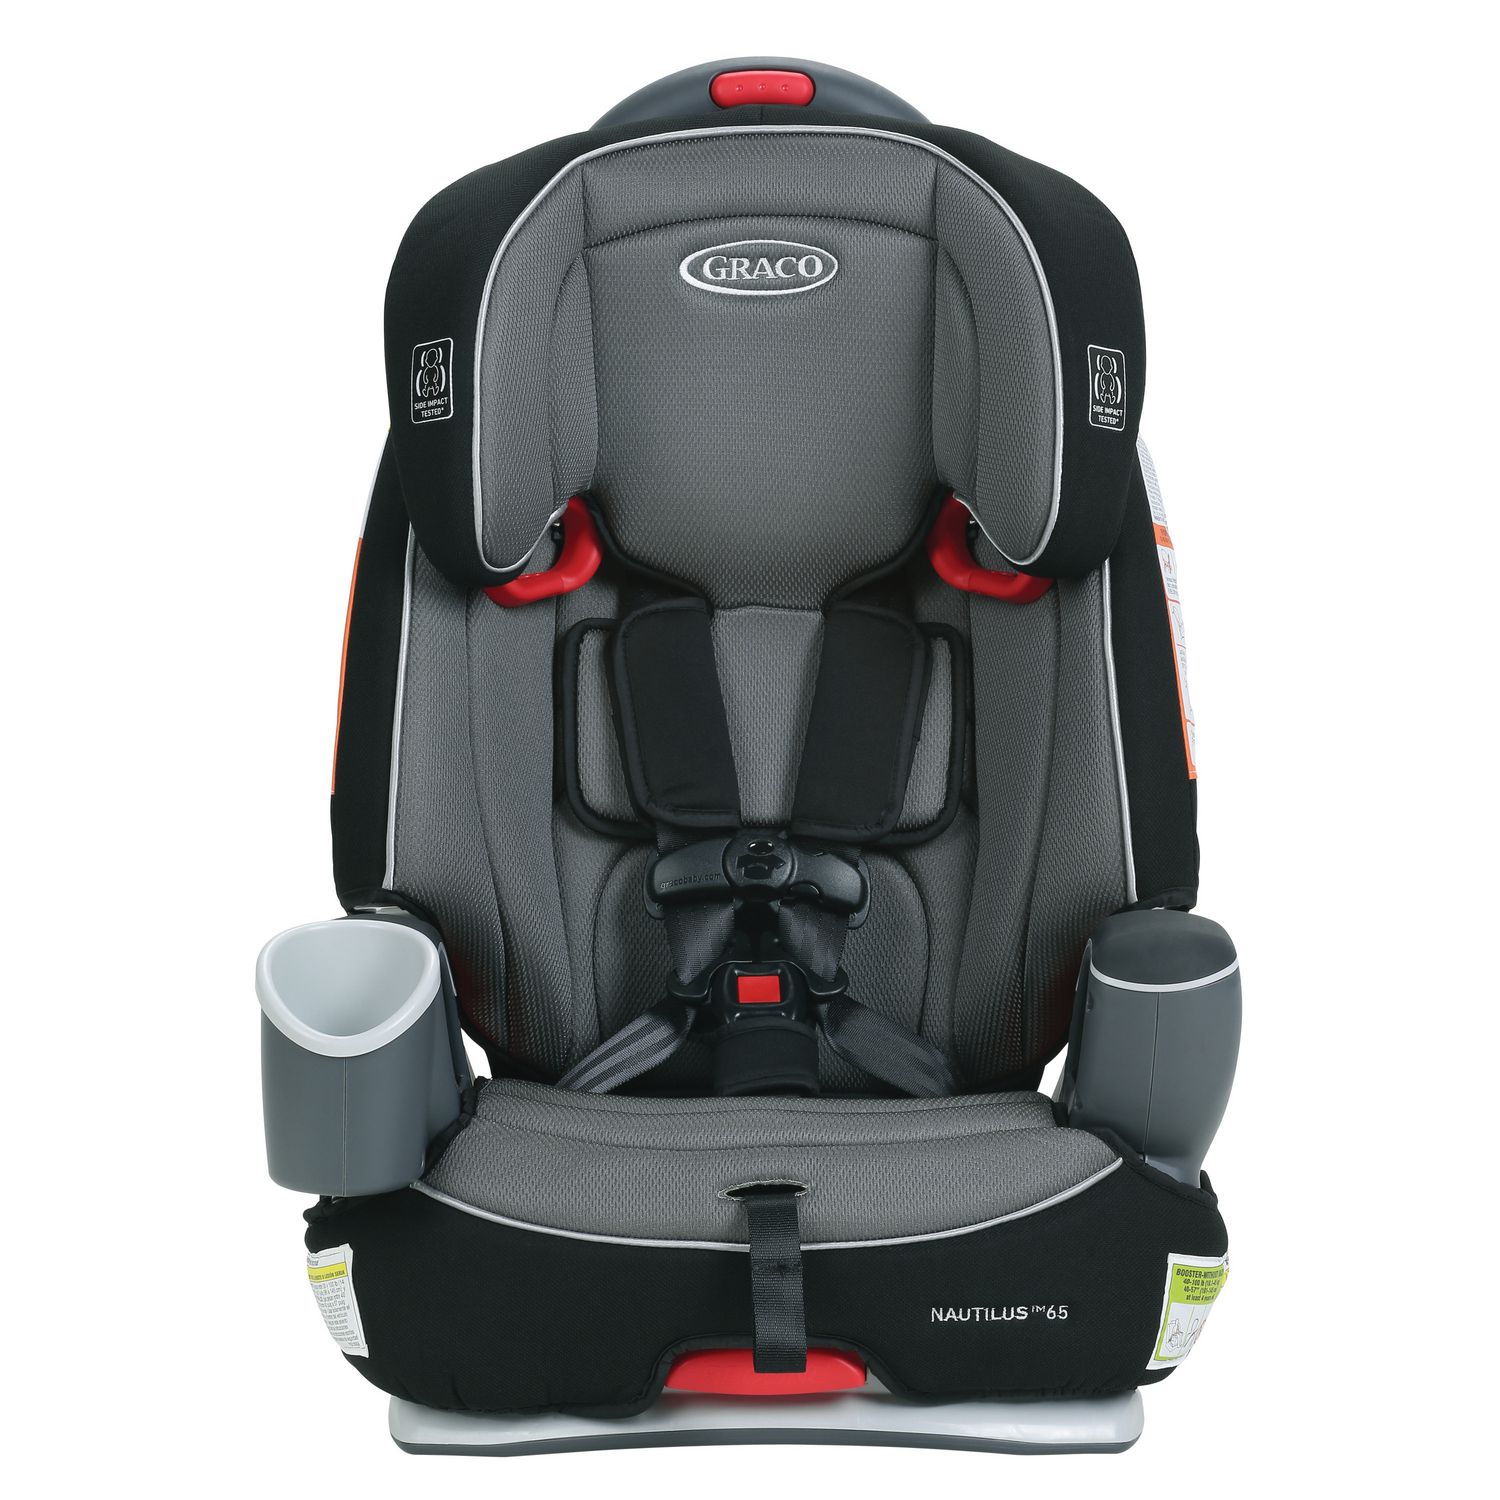 graco 3 in 1 booster seat